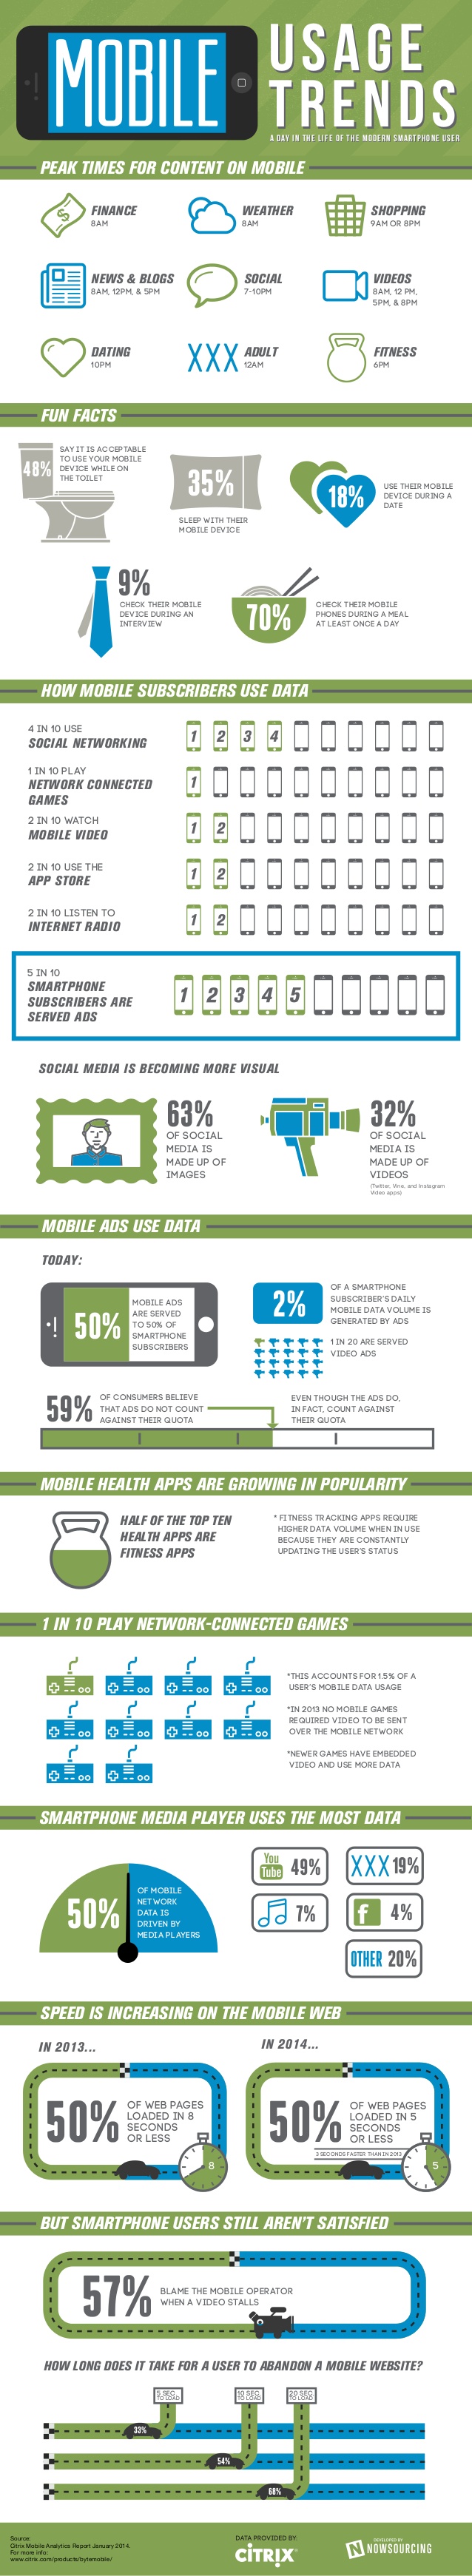 A Day In the Life of the Modern Smartphone User [Infographic]